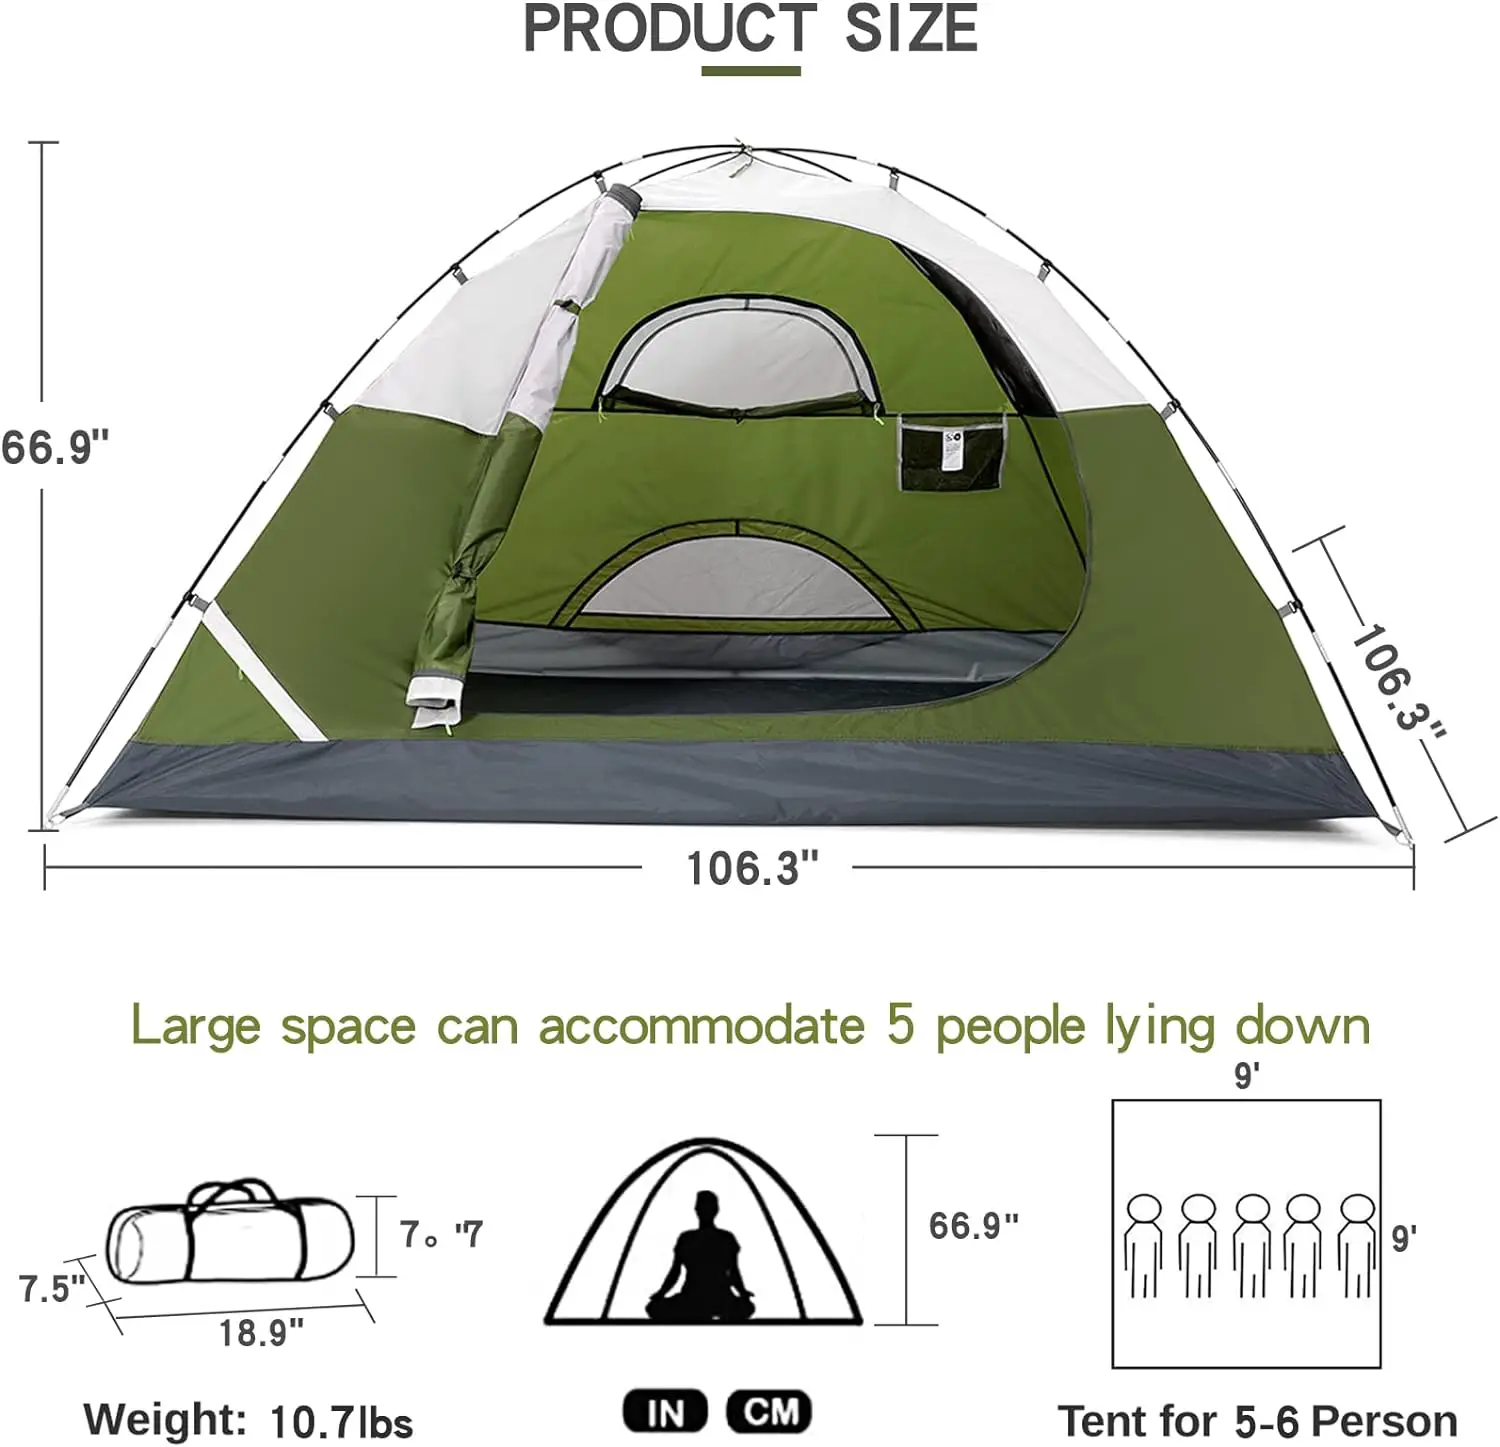 CAMEL CROWN Camping Tent Review